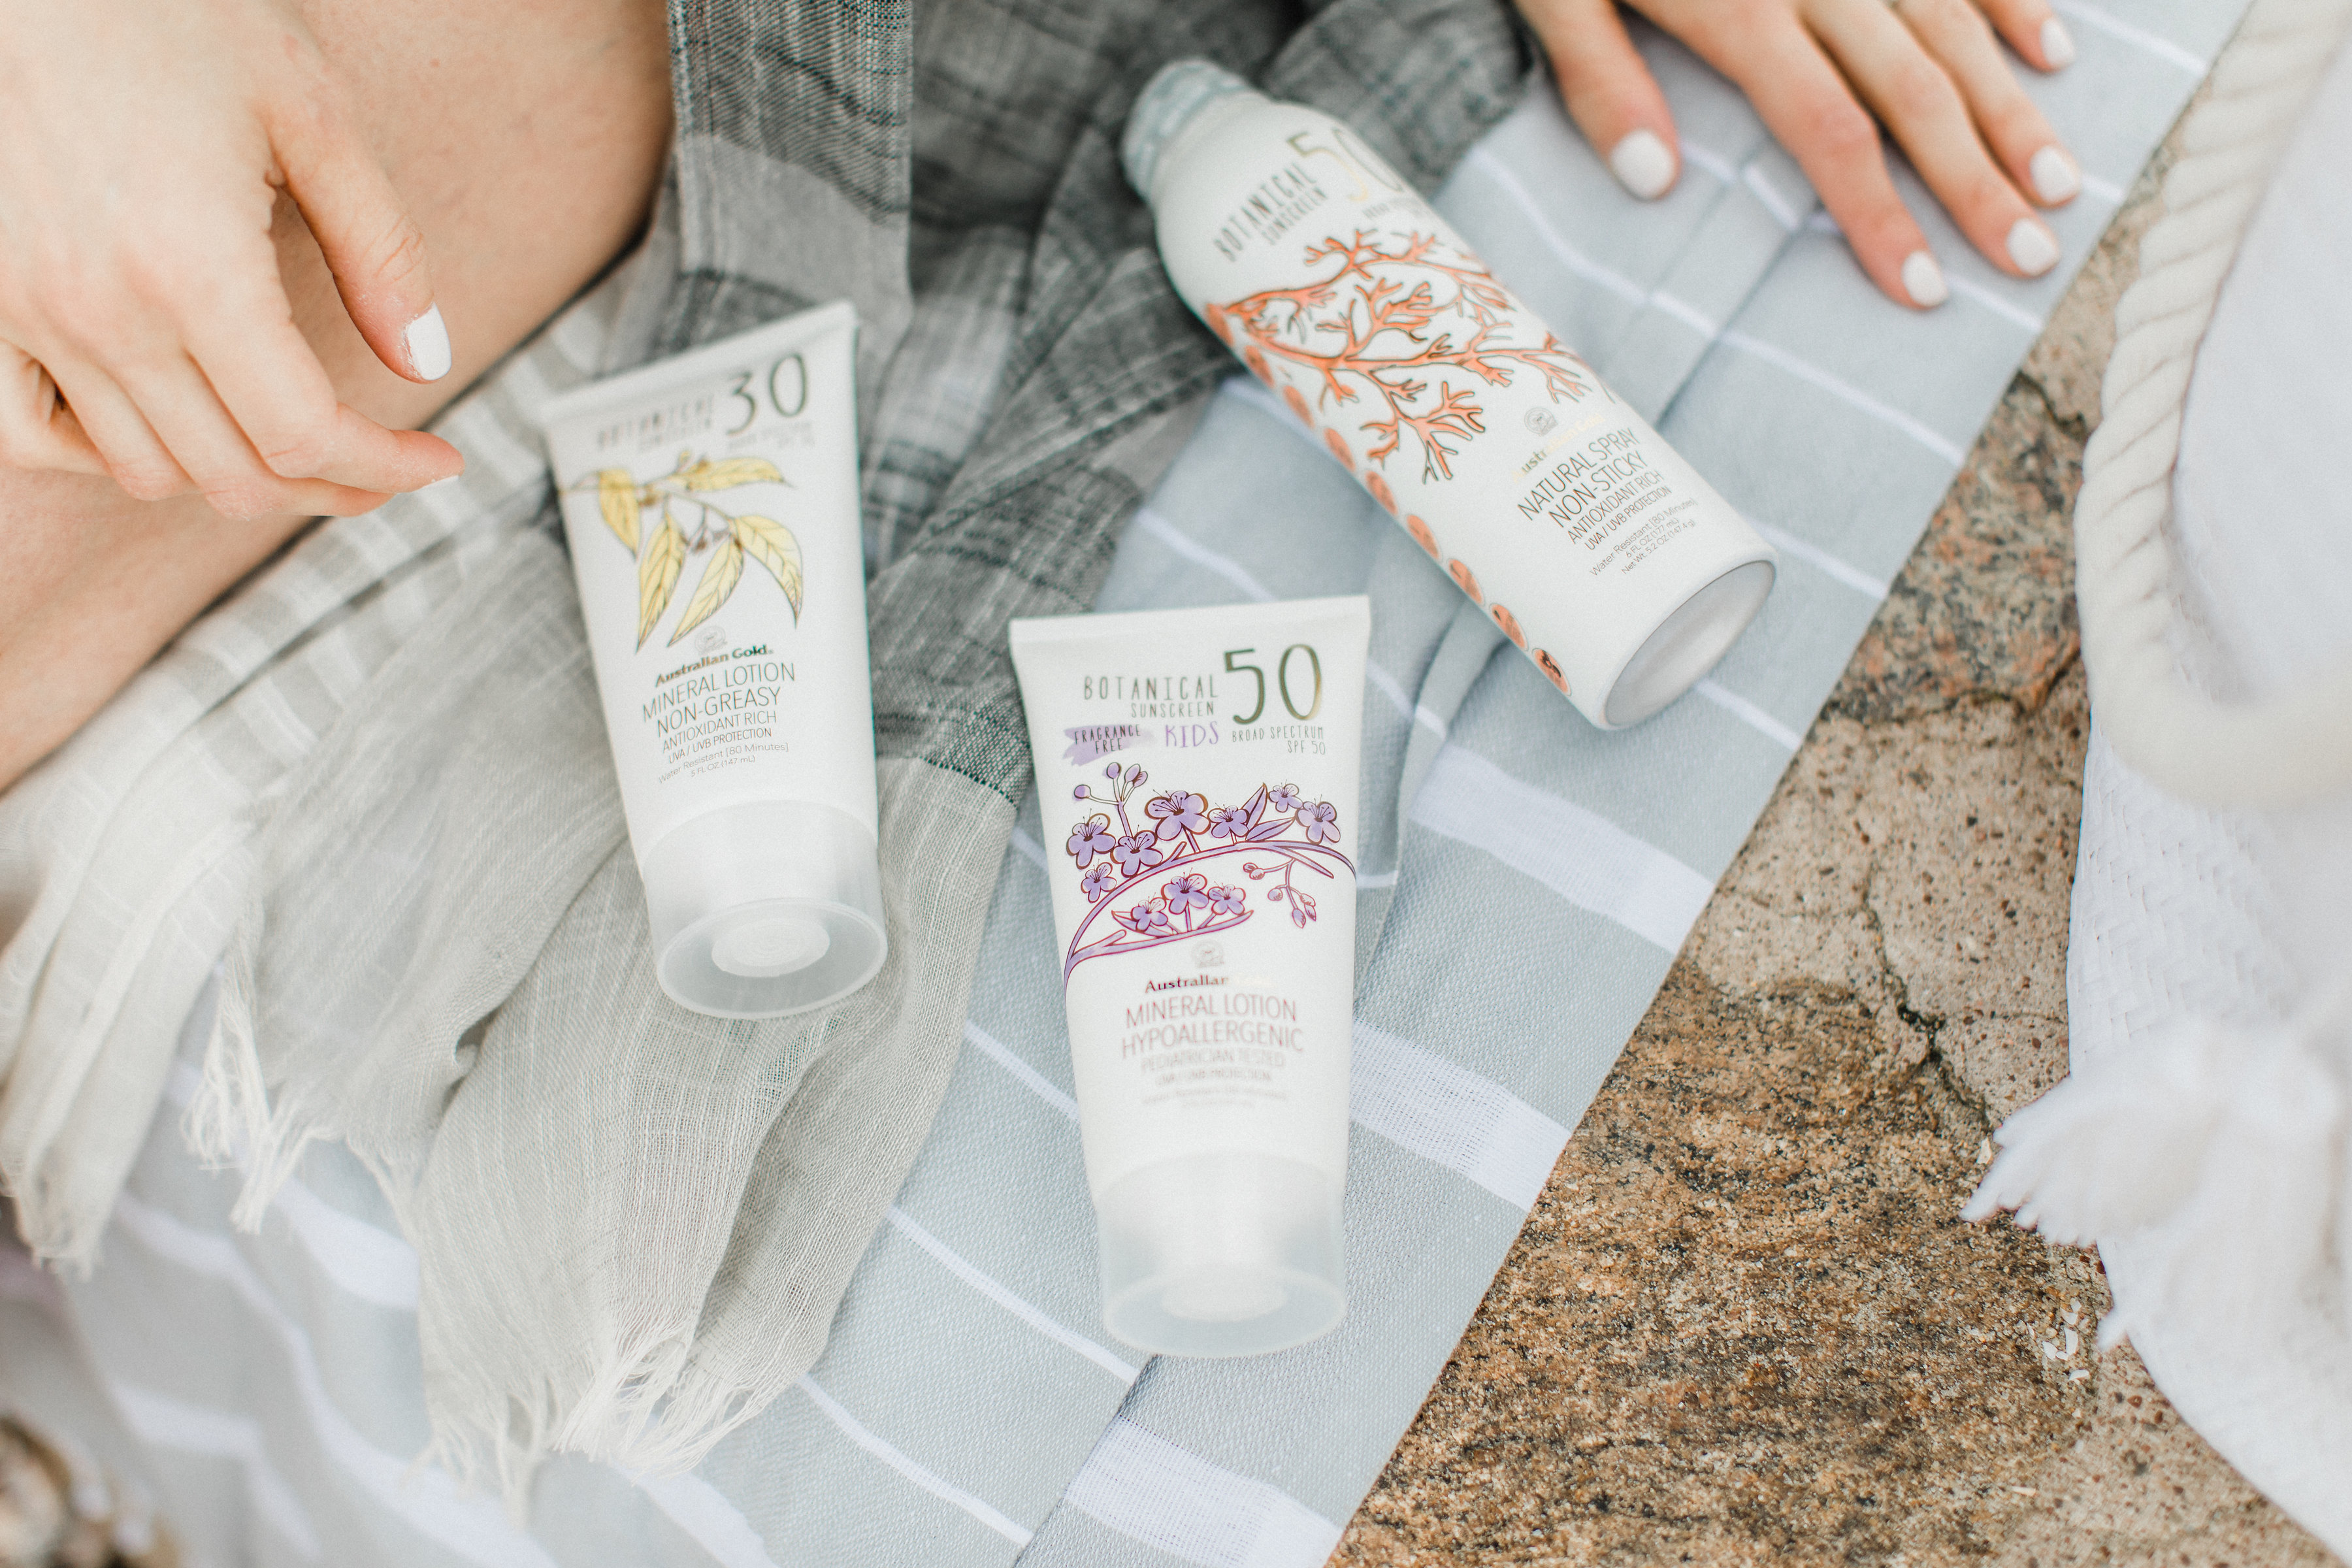 Life and style blogger Lauren McBride shares her Anti-Aging Skincare Tips for Summer, including a new mineral sunscreen that's great for adults and children as well. 